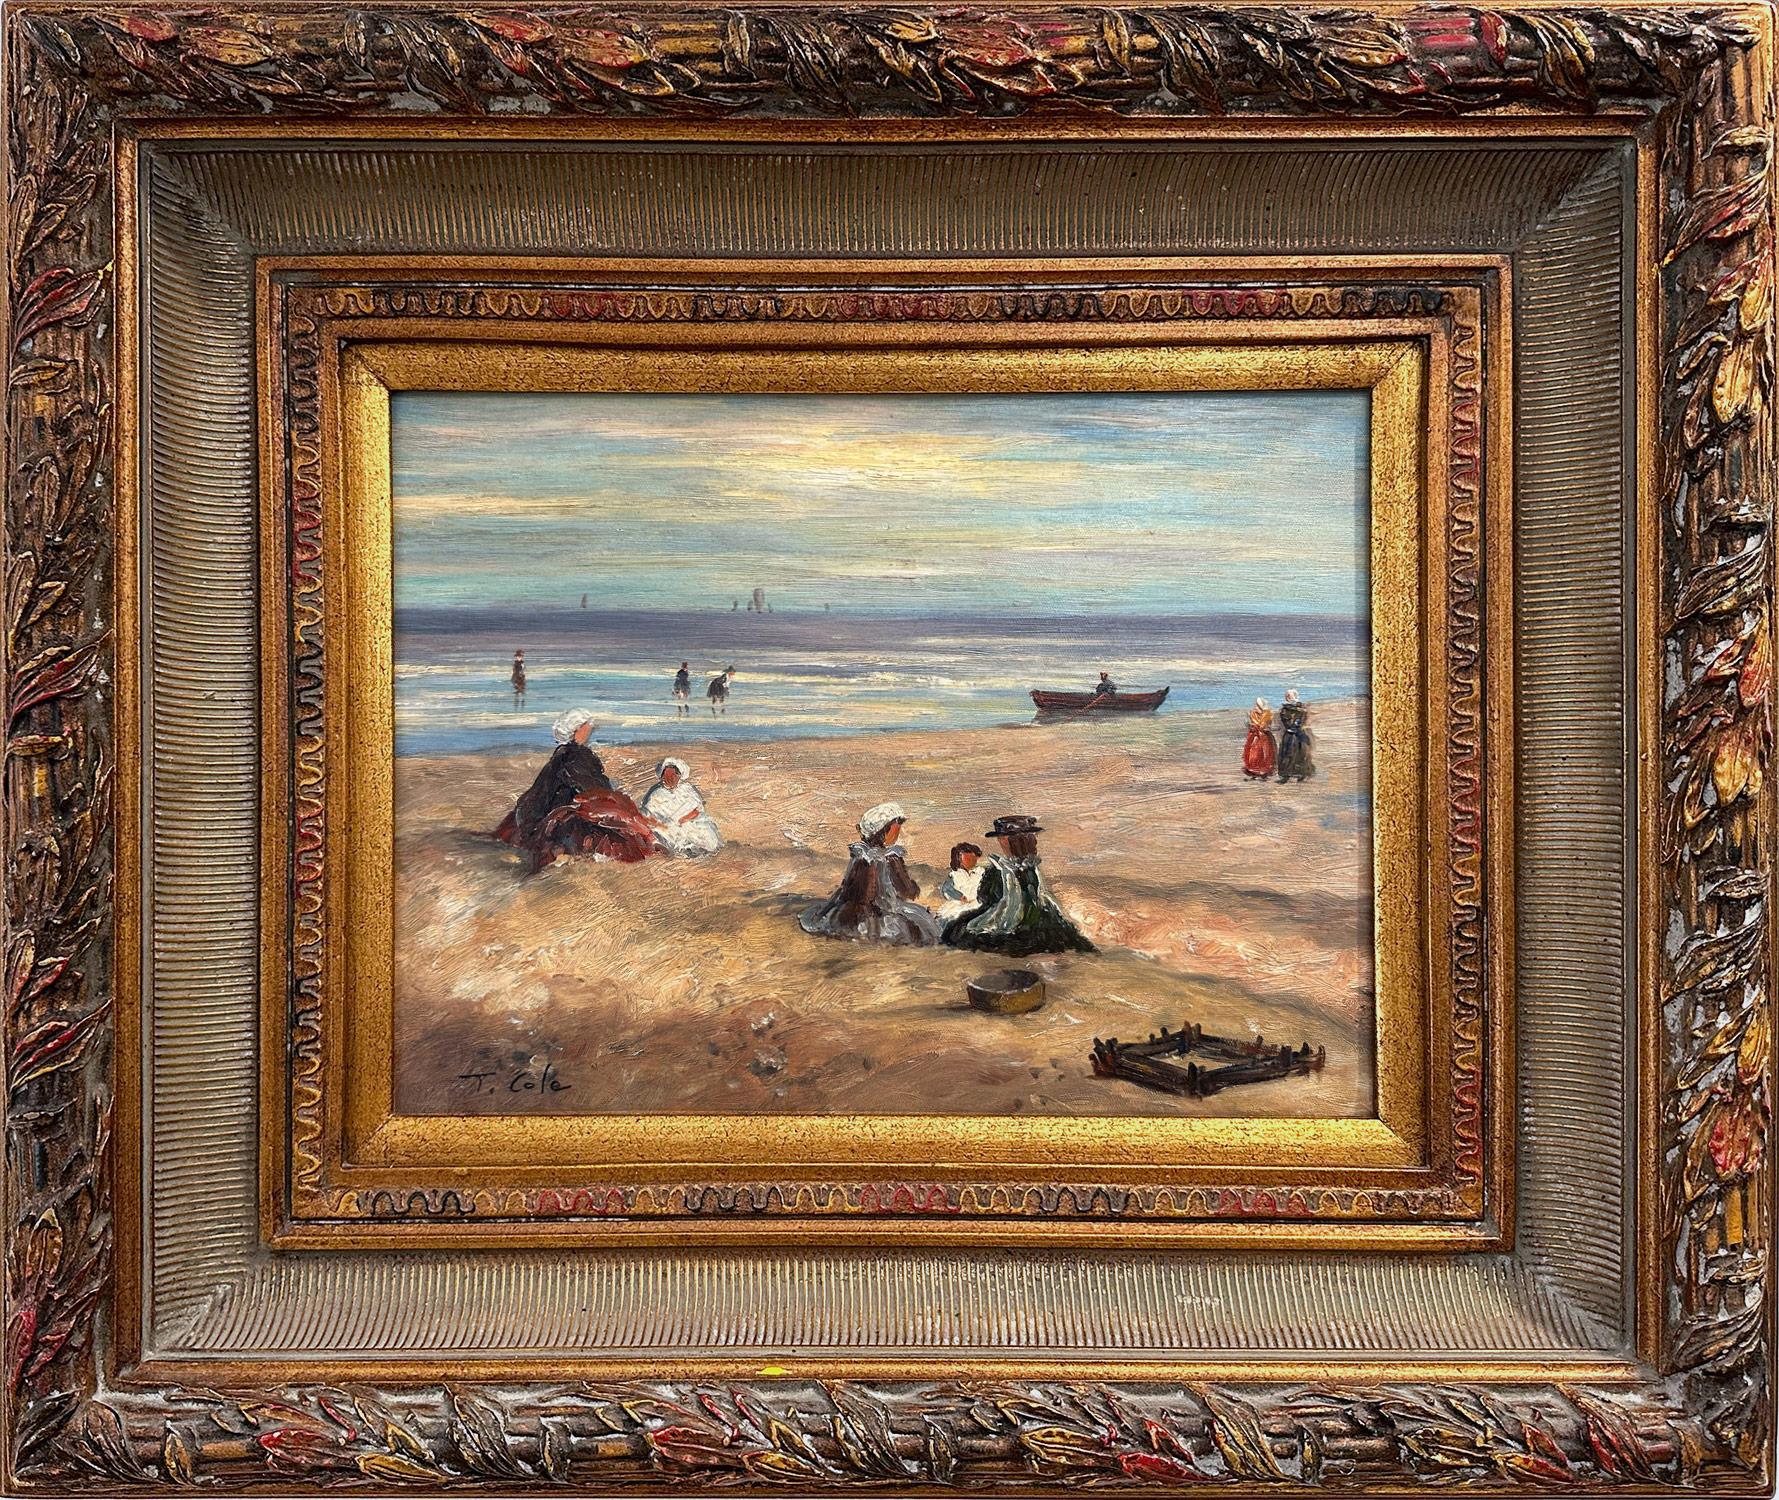 T. Cole Landscape Painting - "Beach Scene With Figures" 20th Century British Impressionist Oil Painting